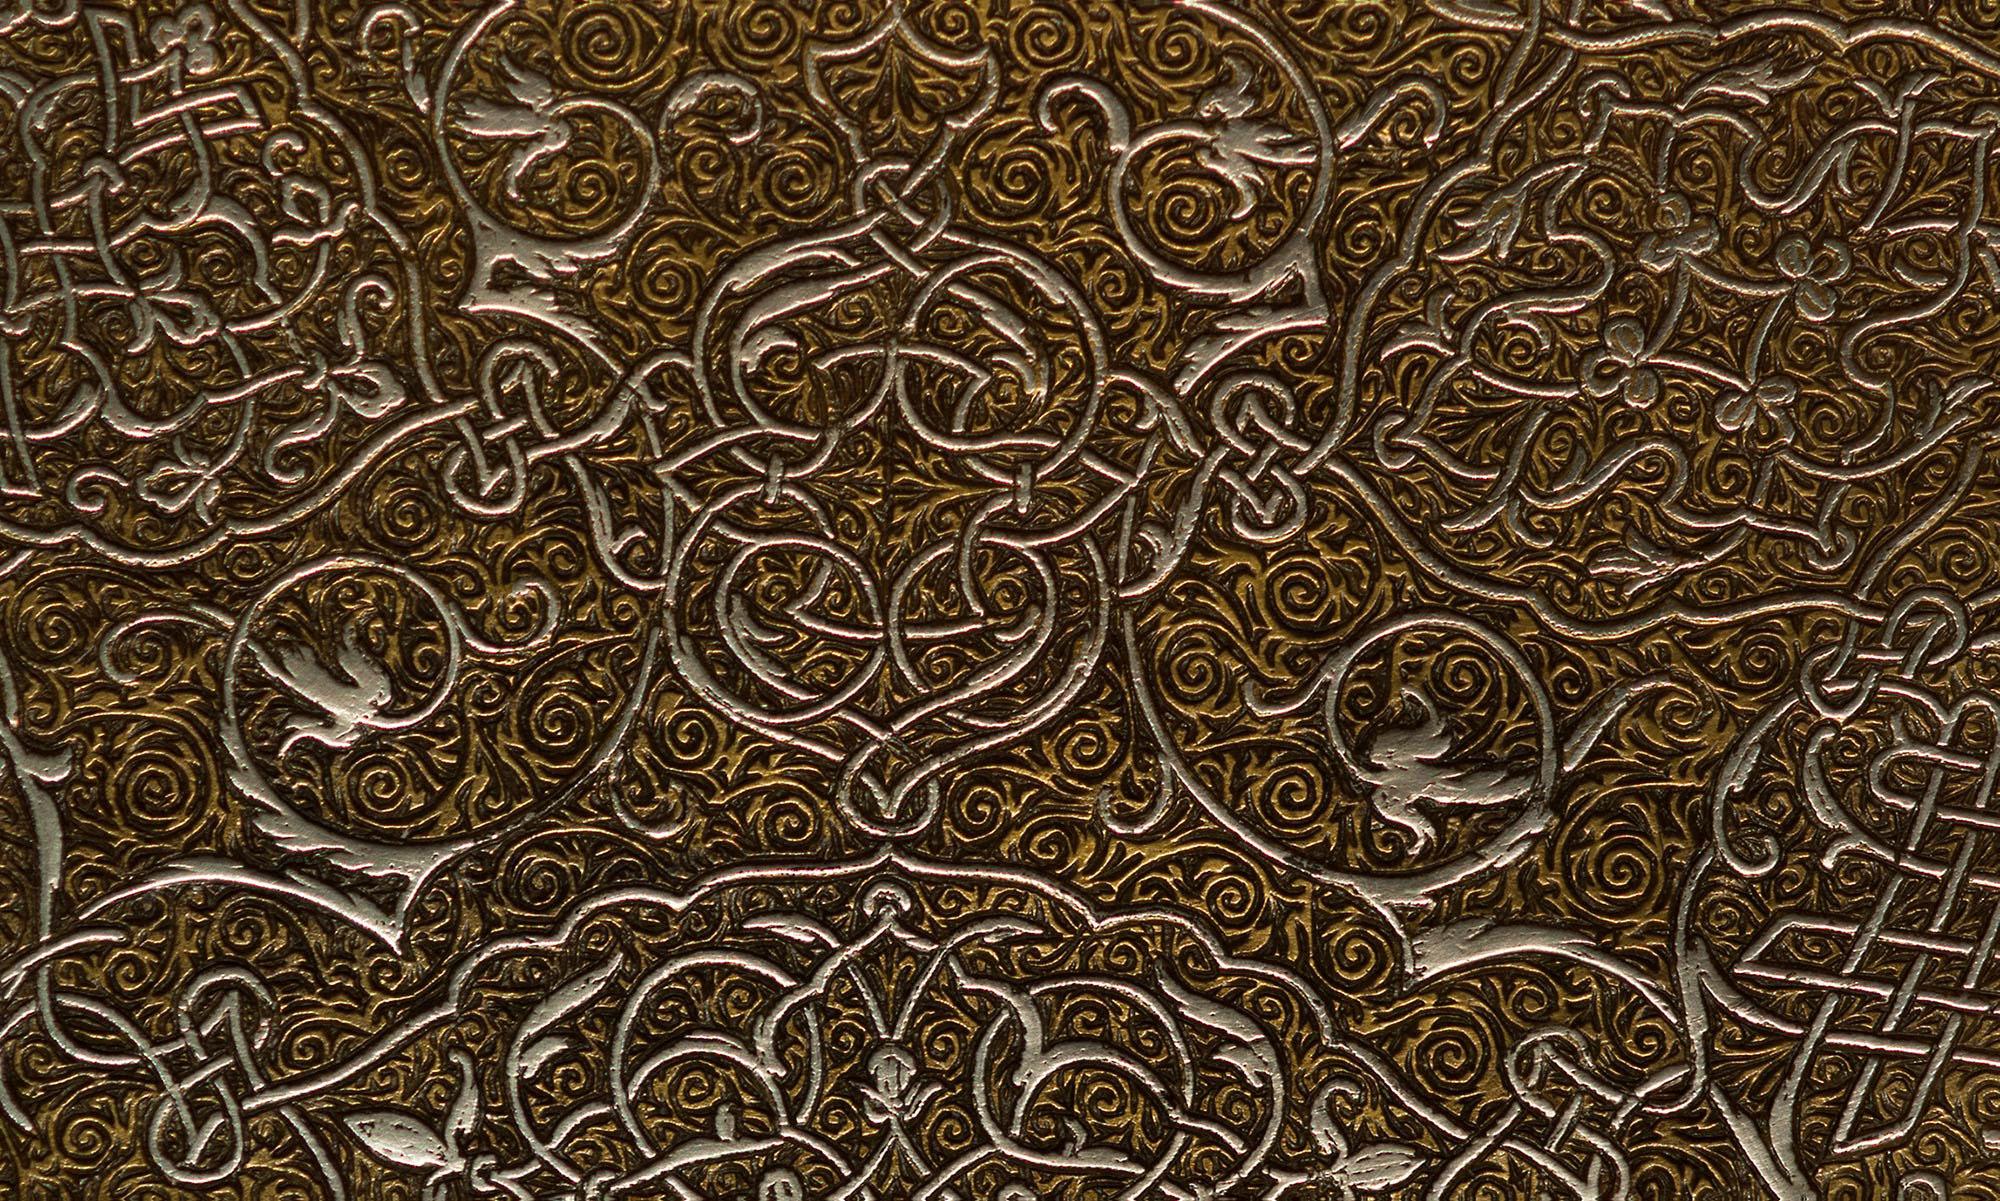 Zoë Design. Filigree coverings with twists and turns